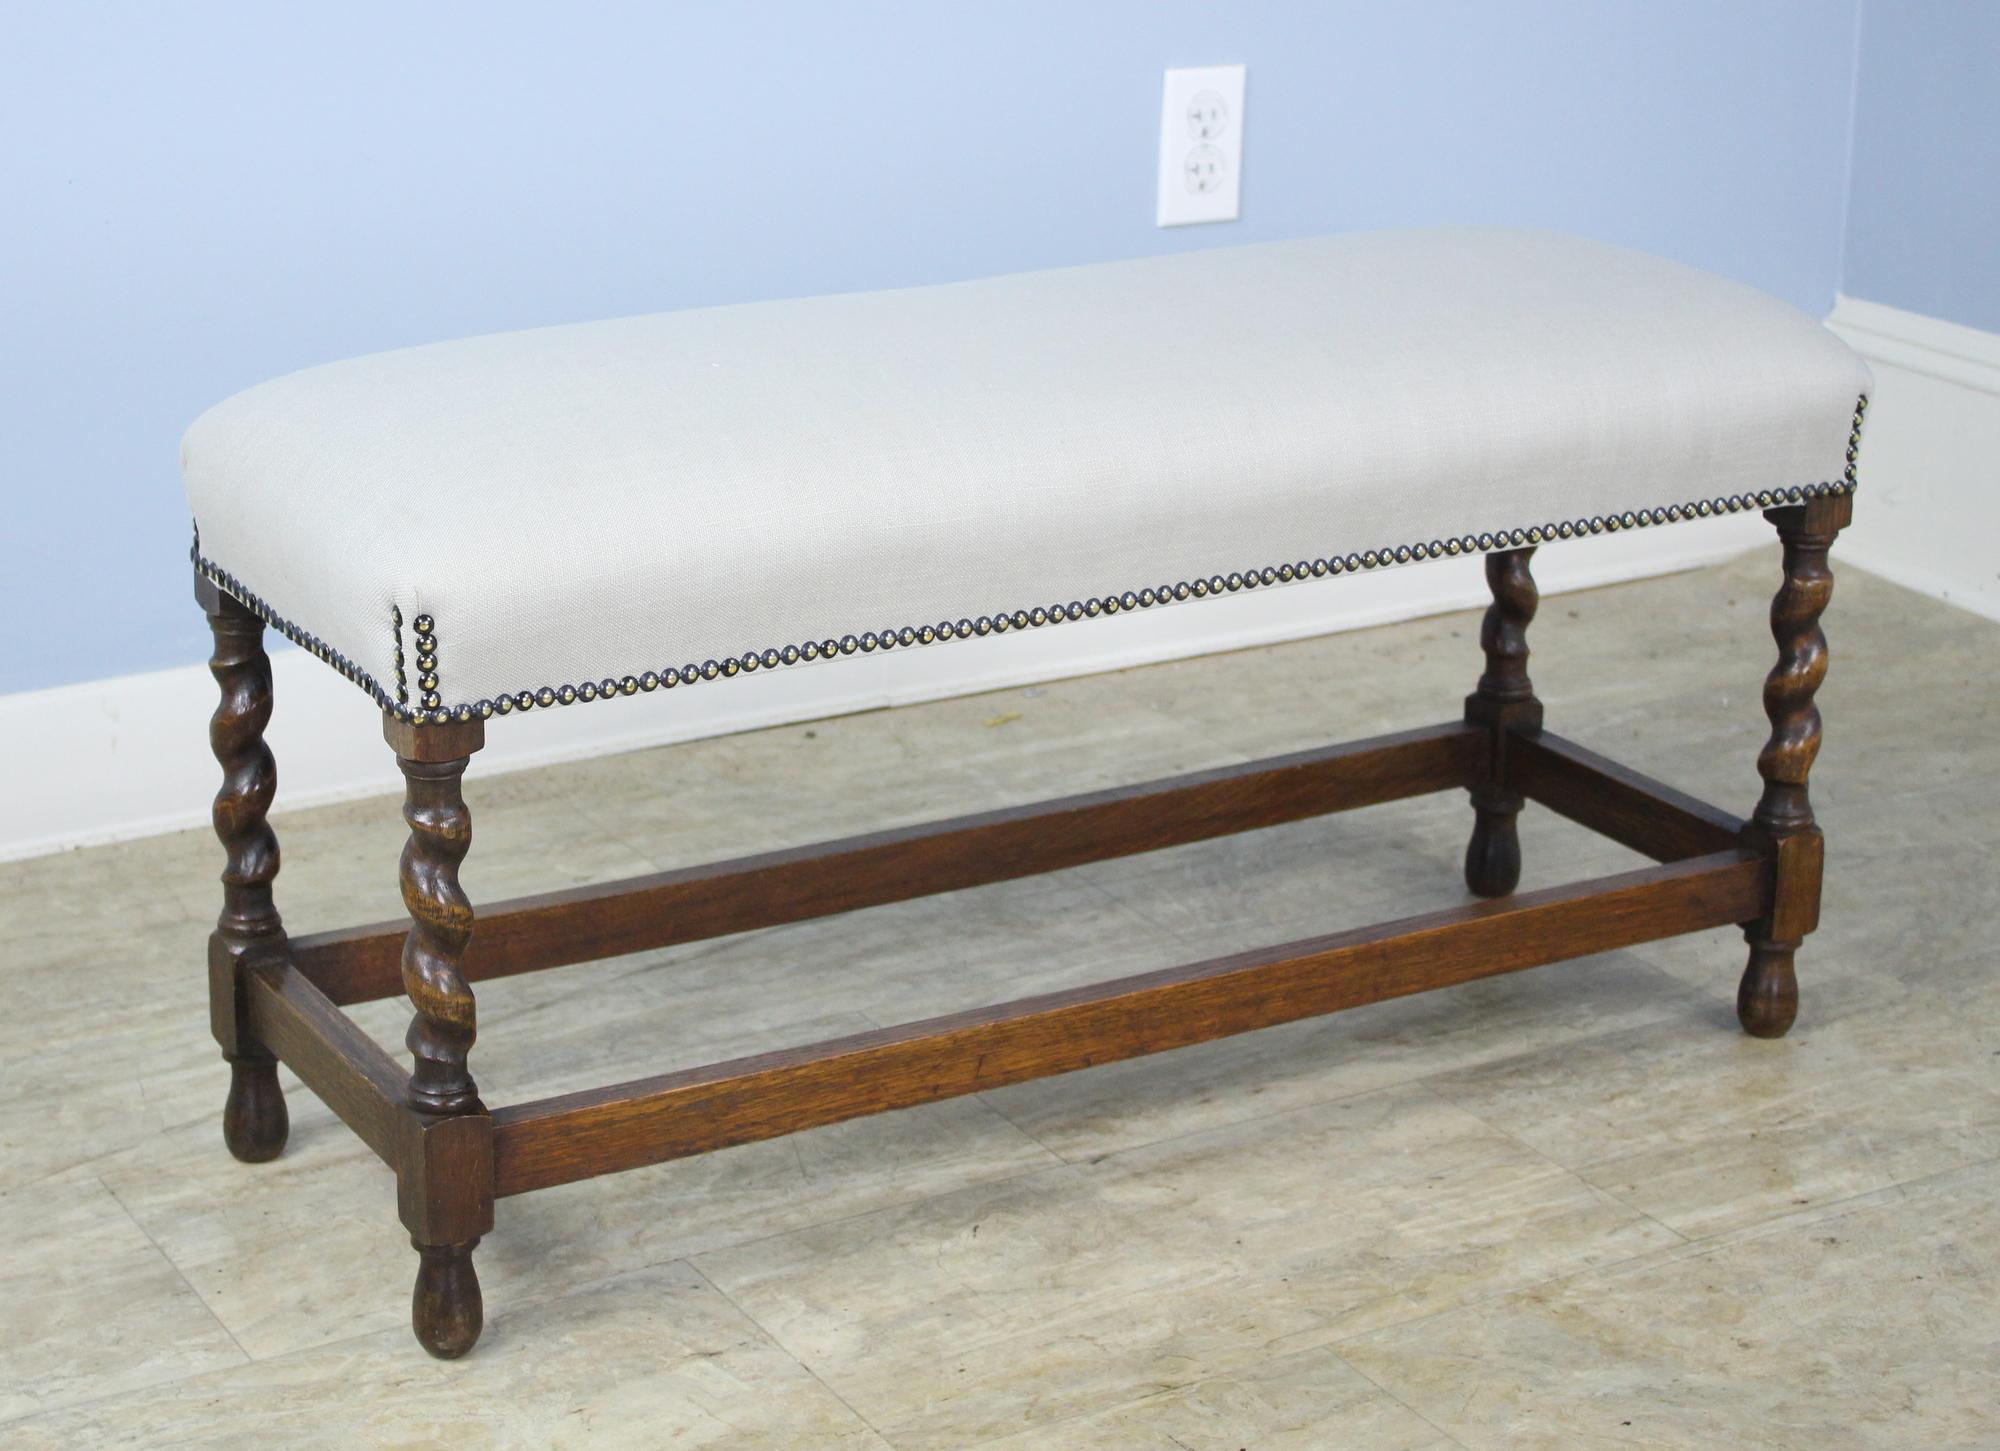 A small stool or bench with visually arresting oak barley twist supports. Good nailhead detail where the seat meets the legs. Newly upholstered in gray linen to be used as is or reupholstered. Charming!